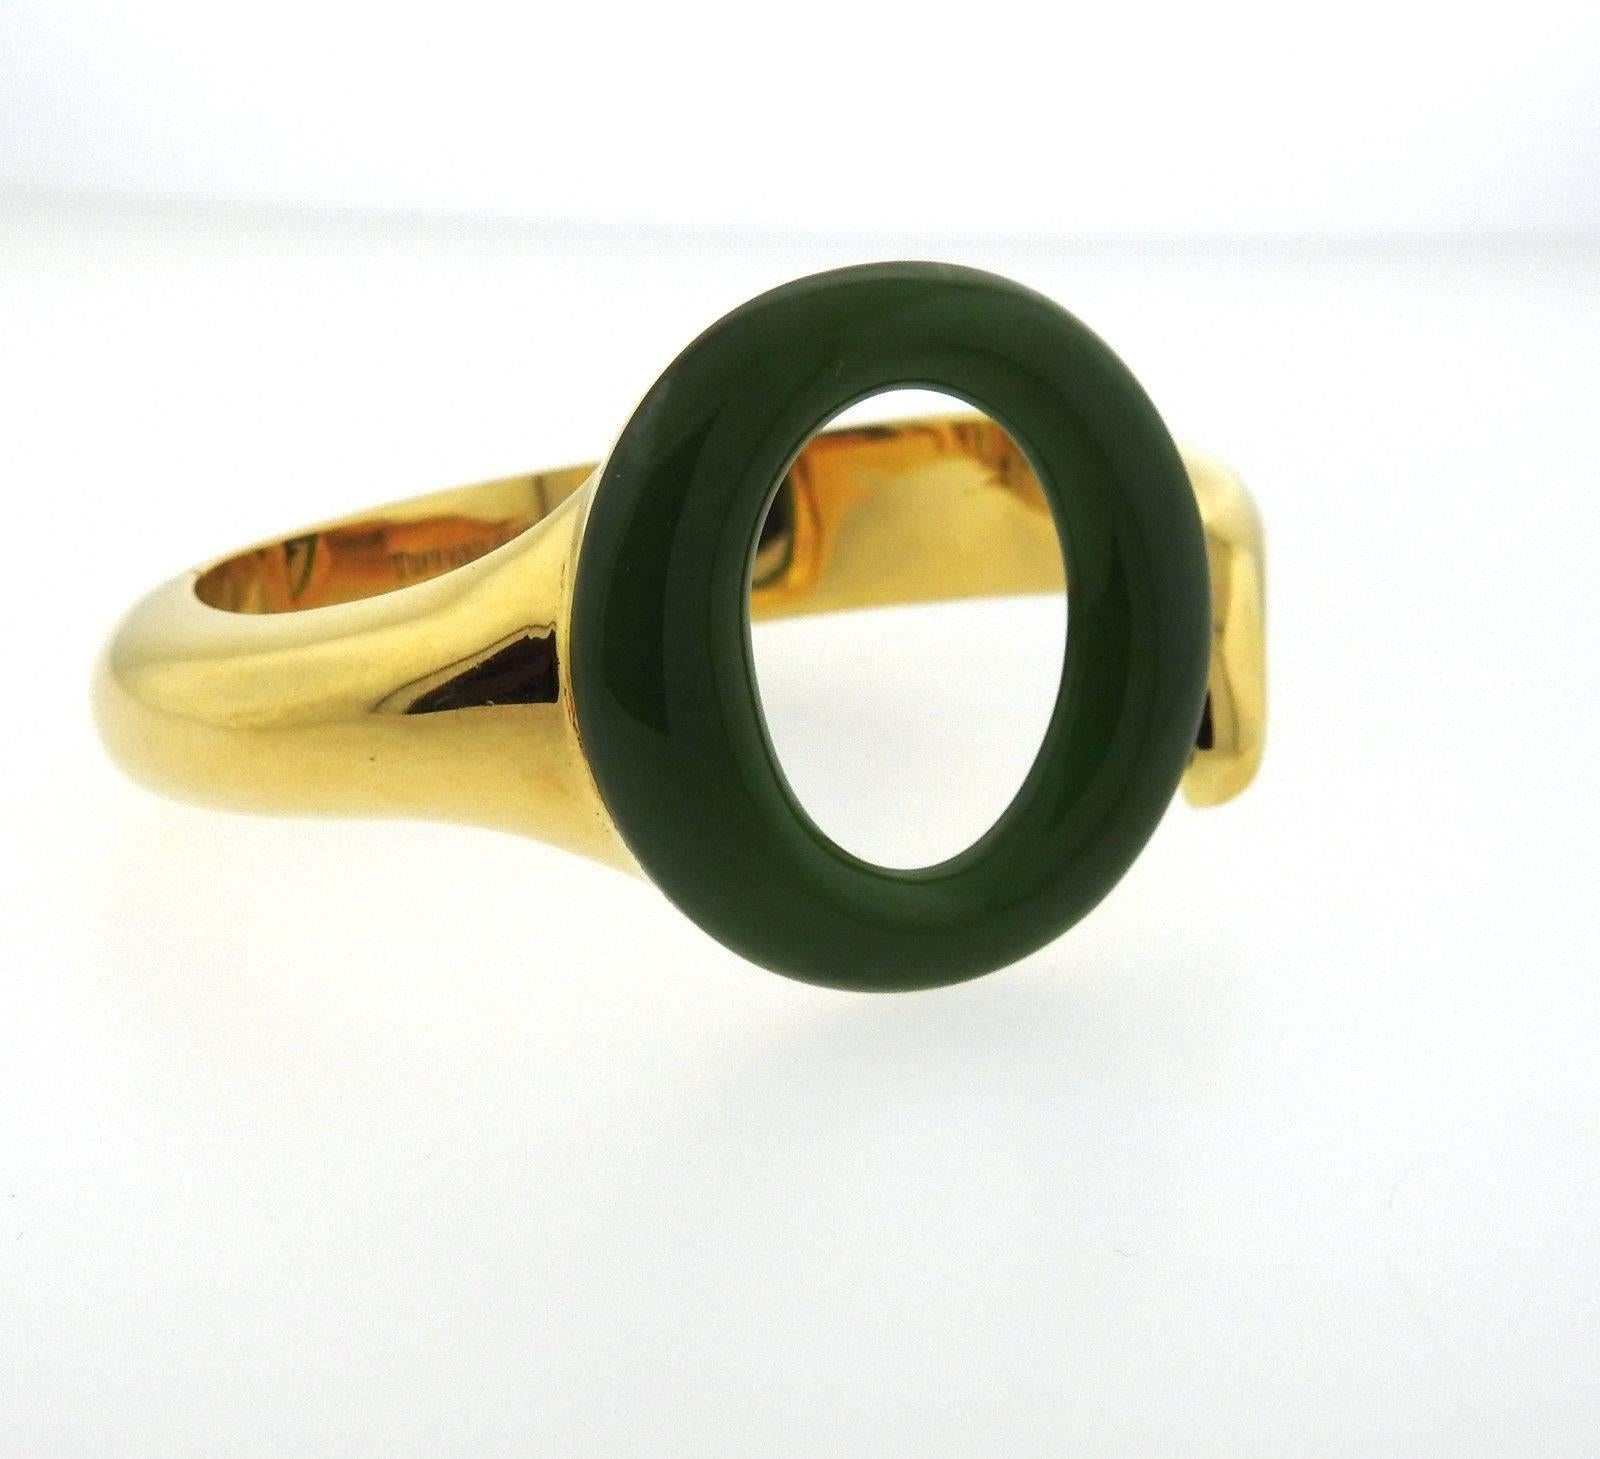 An 18k yellow gold bracelet set with Jade measuring 35mm in diameter.  The bracelet will comfortably fit 6 1/2